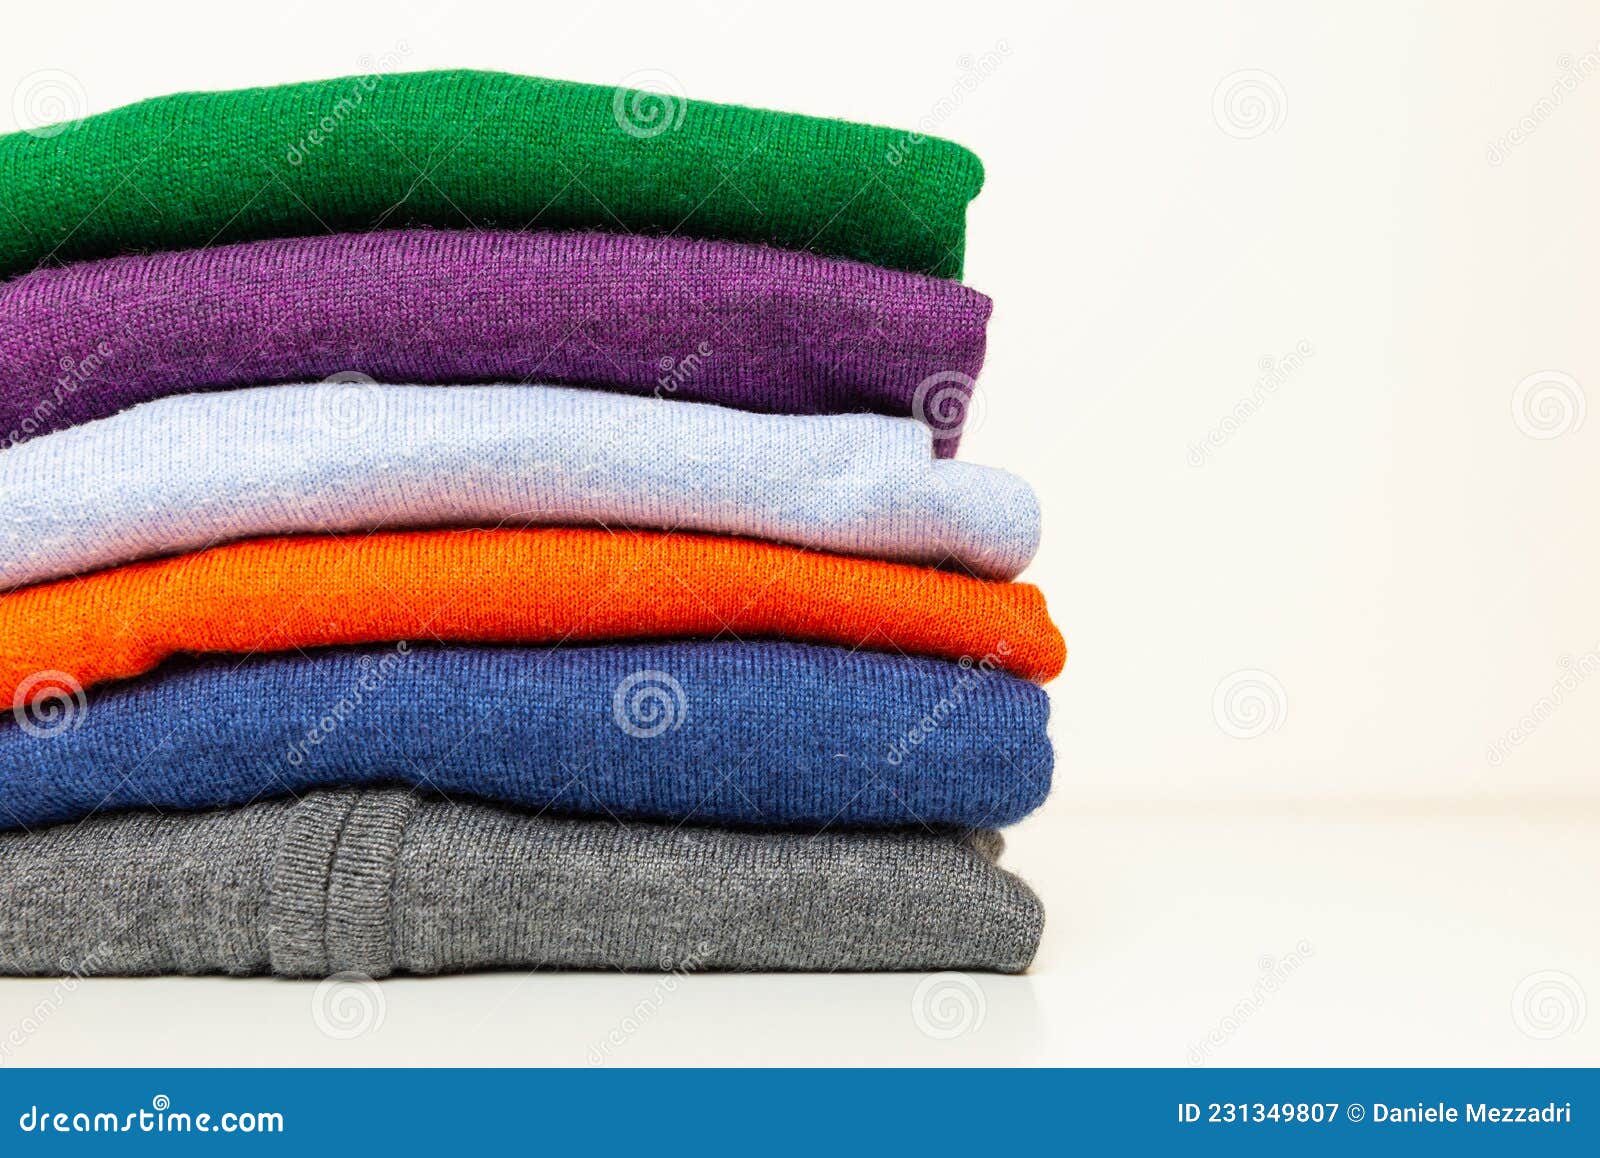 Stack of Overlapping Sweaters Stock Image - Image of color, fabric ...